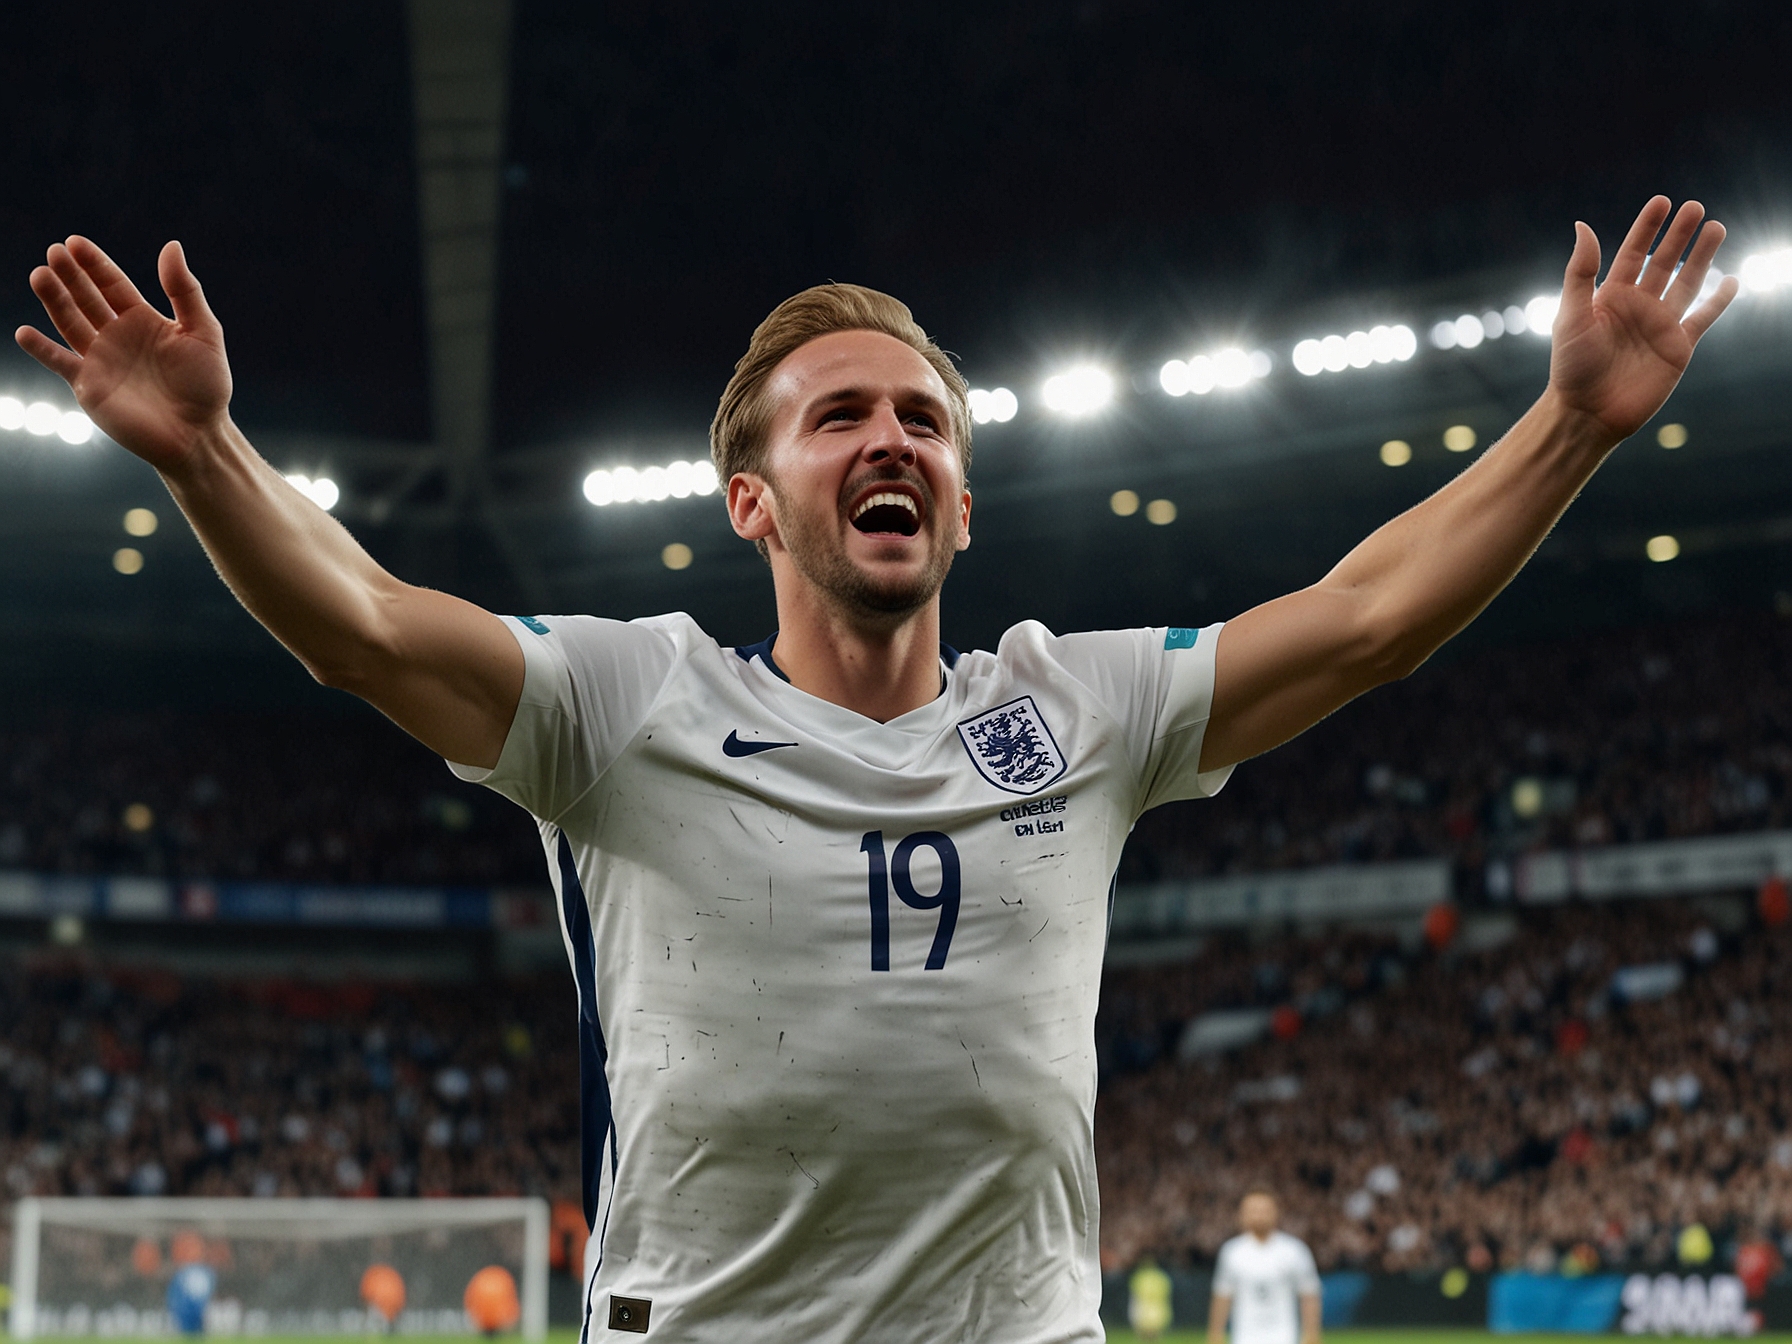 Harry Kane celebrates after scoring the winning goal with a brilliant header from a cross, highlighting his role as England's crucial striker in their 2-1 victory over Slovakia.